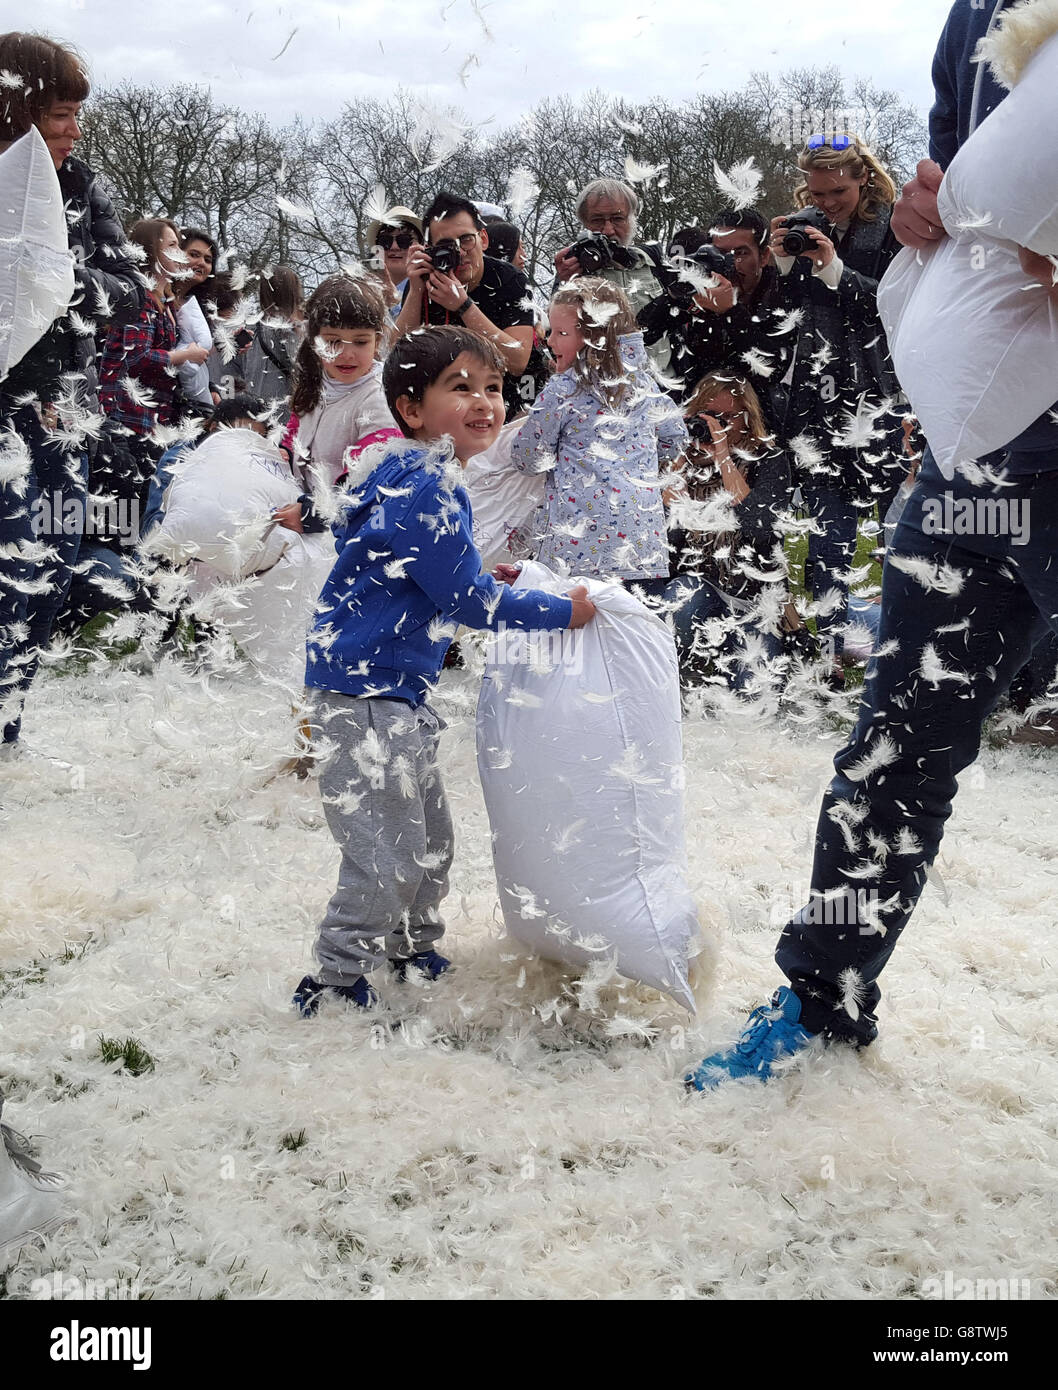 People take part in a mass pillow fight in Kennington park in London, to mark International Pillow Fight Day. Stock Photo